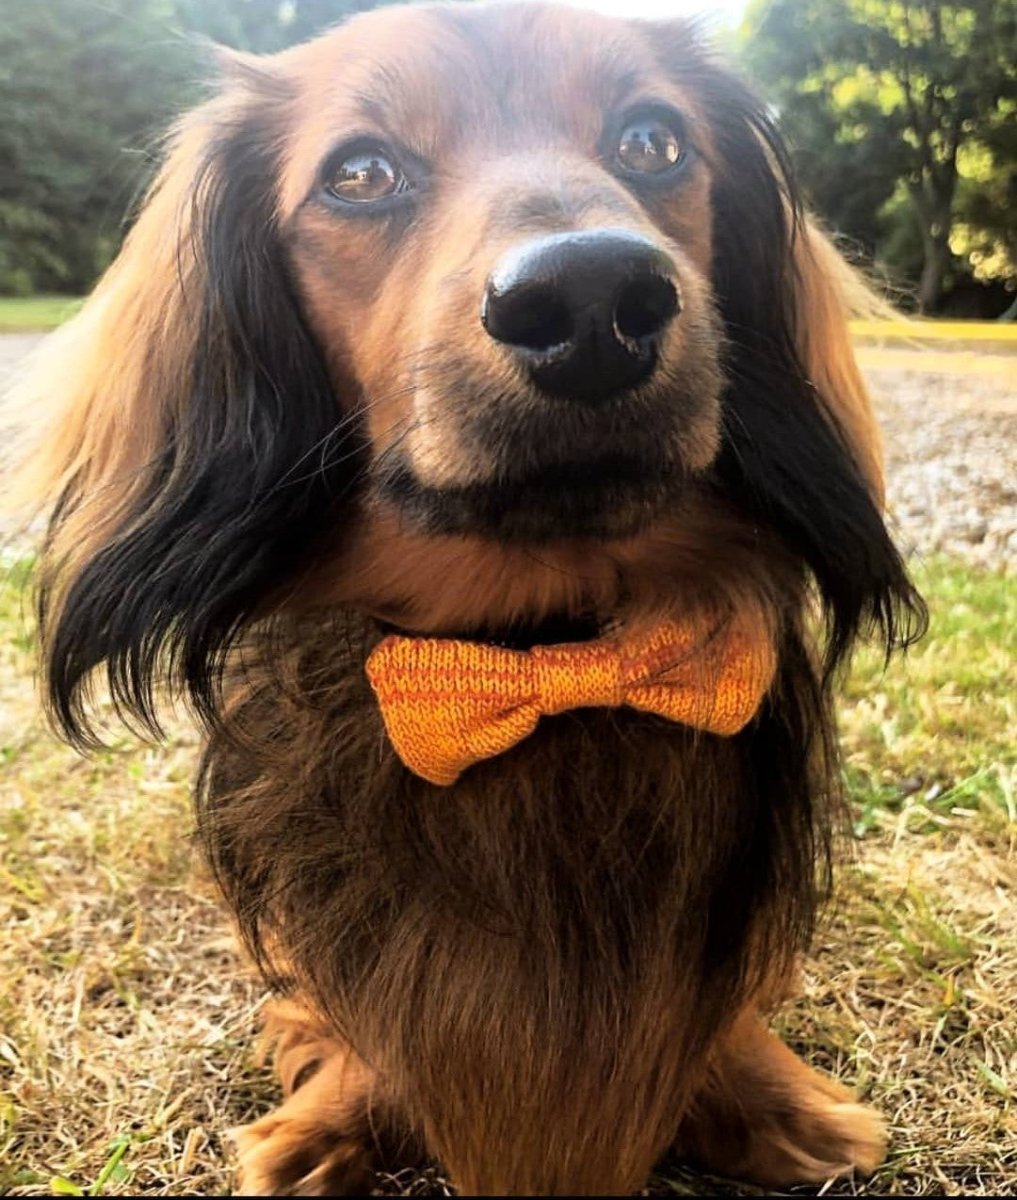 Tiny Dog Bow Tie (4 colours available) - Wool & Water